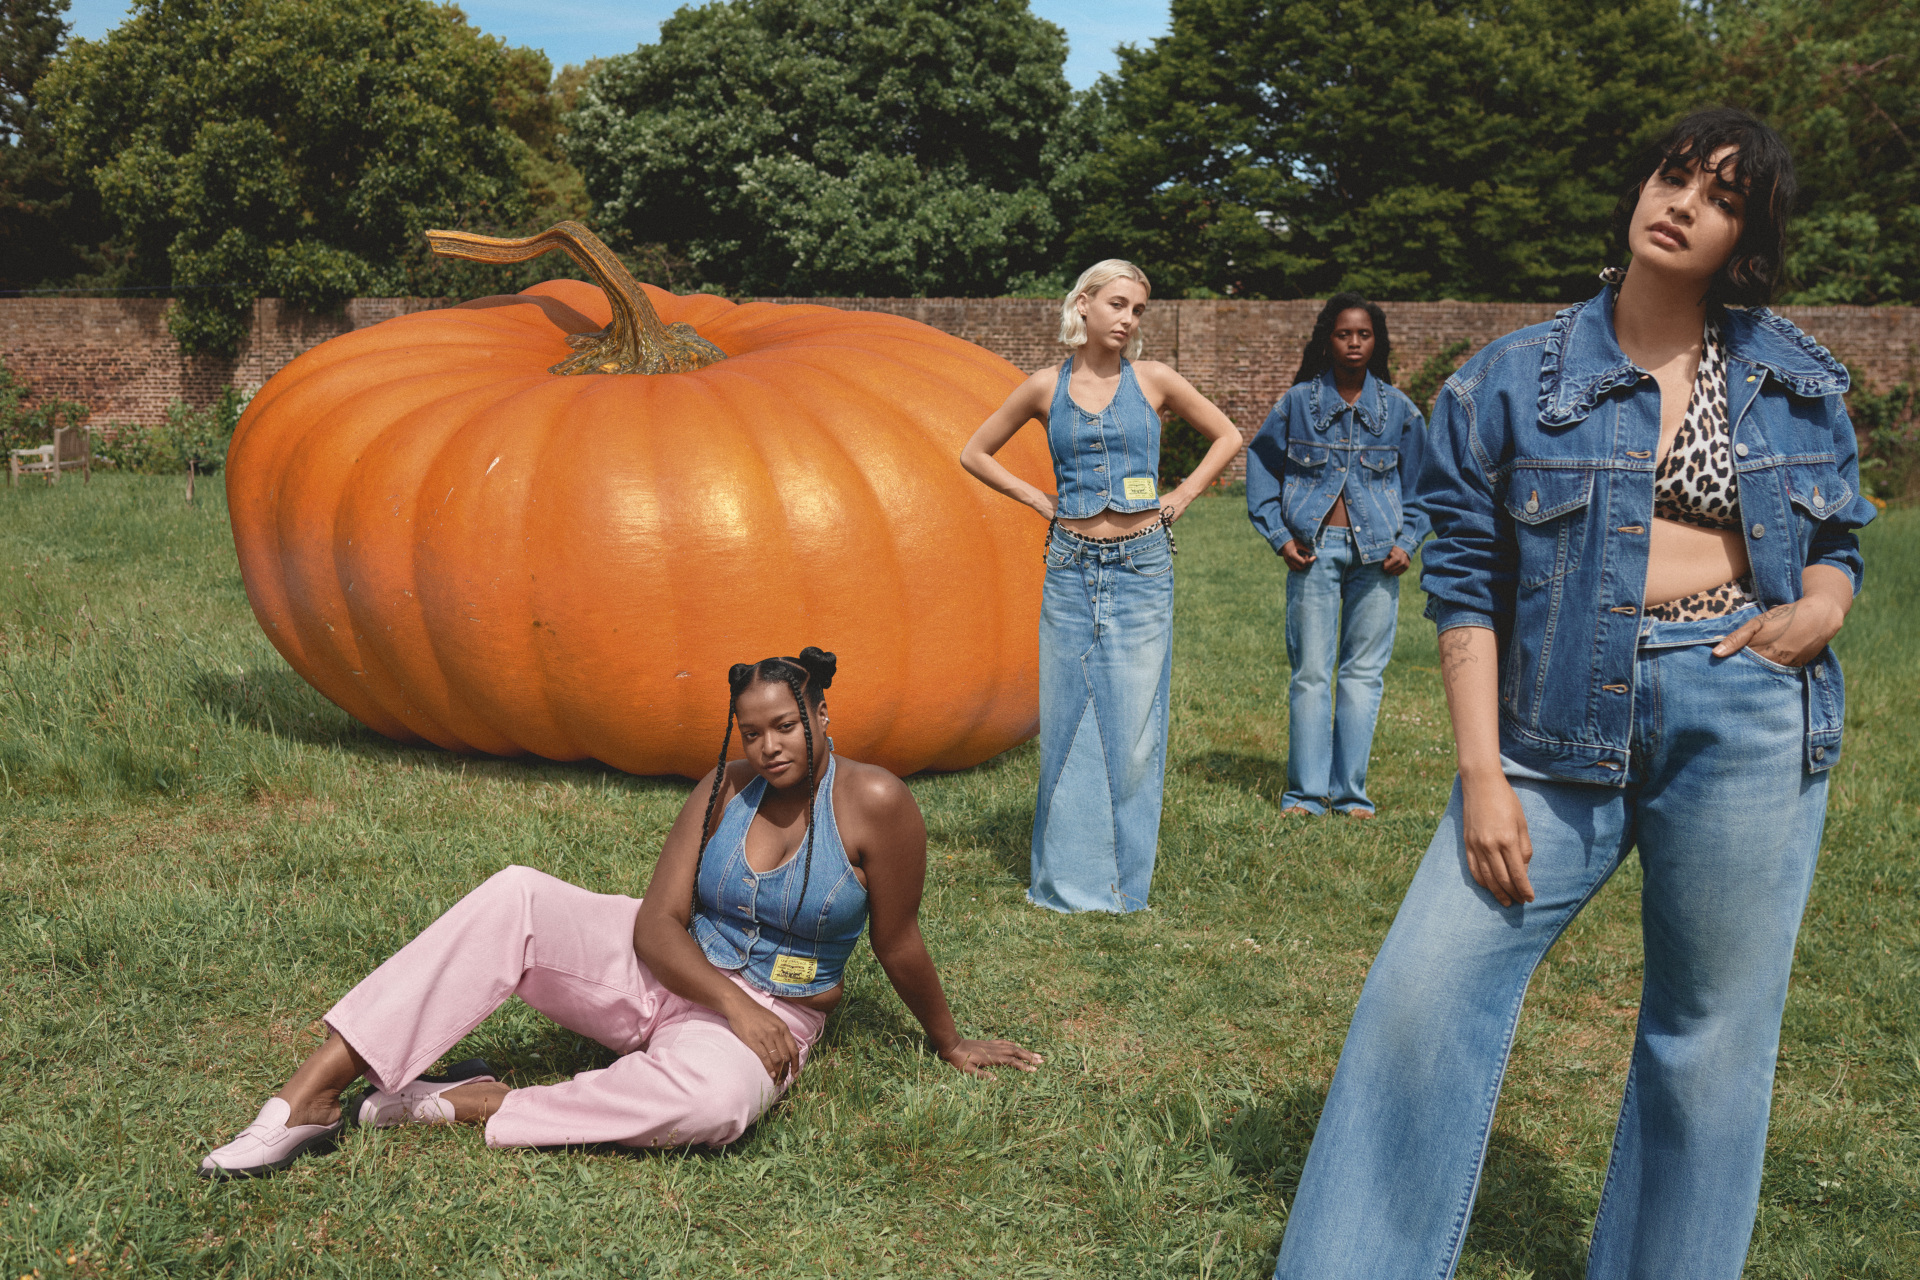 Models in denim outfits sat outdoors nect to giant pumpkin